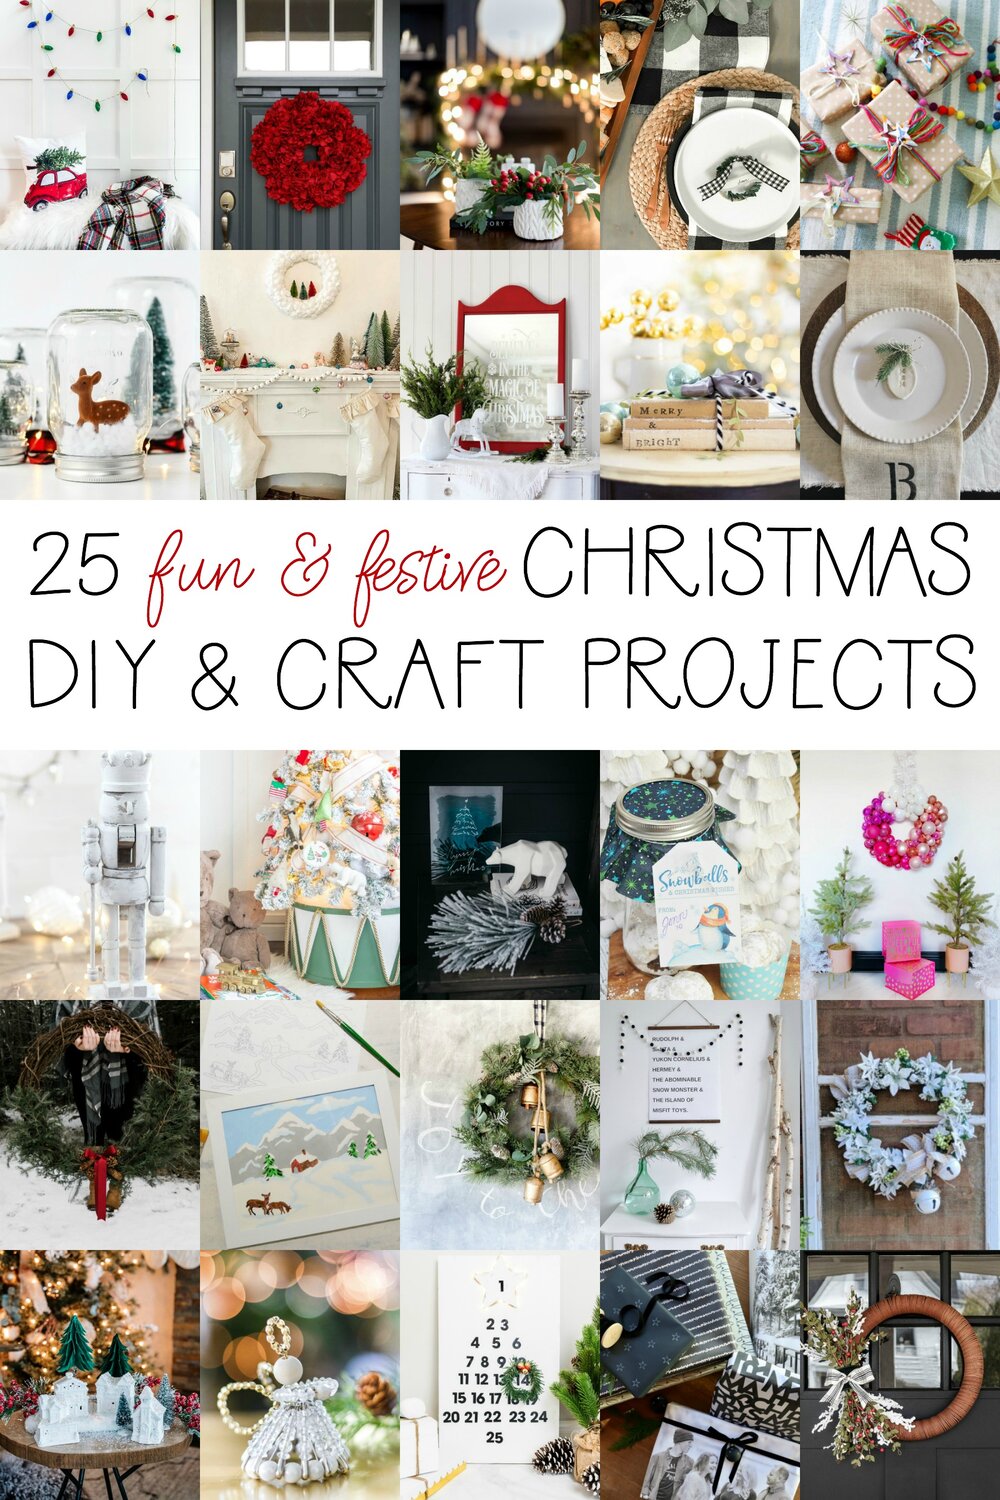 25 fun festive Christmas DIY & Craft Projects at the happy housie.jpg